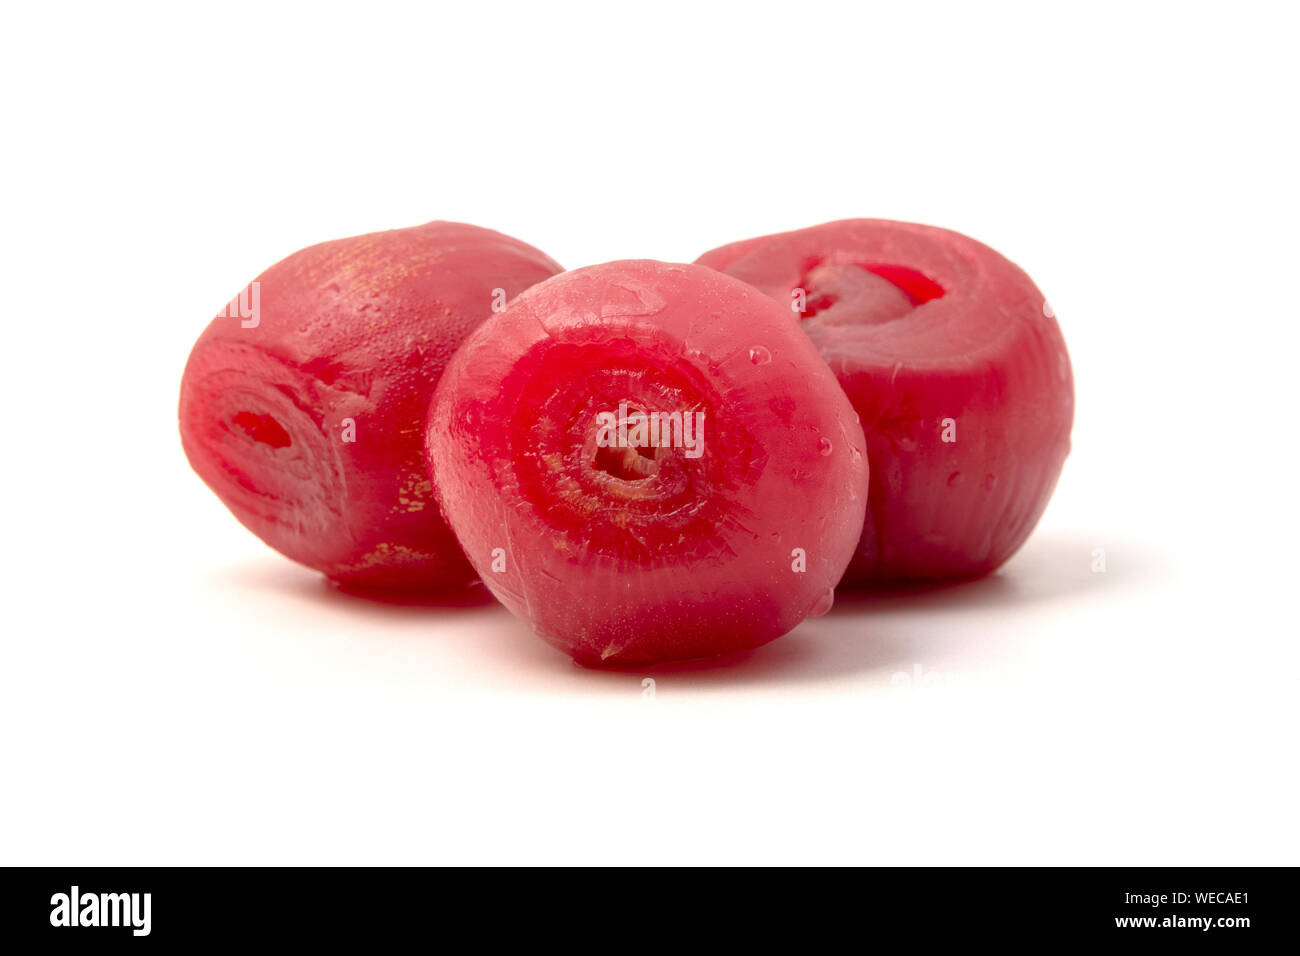 Torshi Red onion, a traditional pickled vegetable of the cuisines of many Balkan and Middle East countries Stock Photo